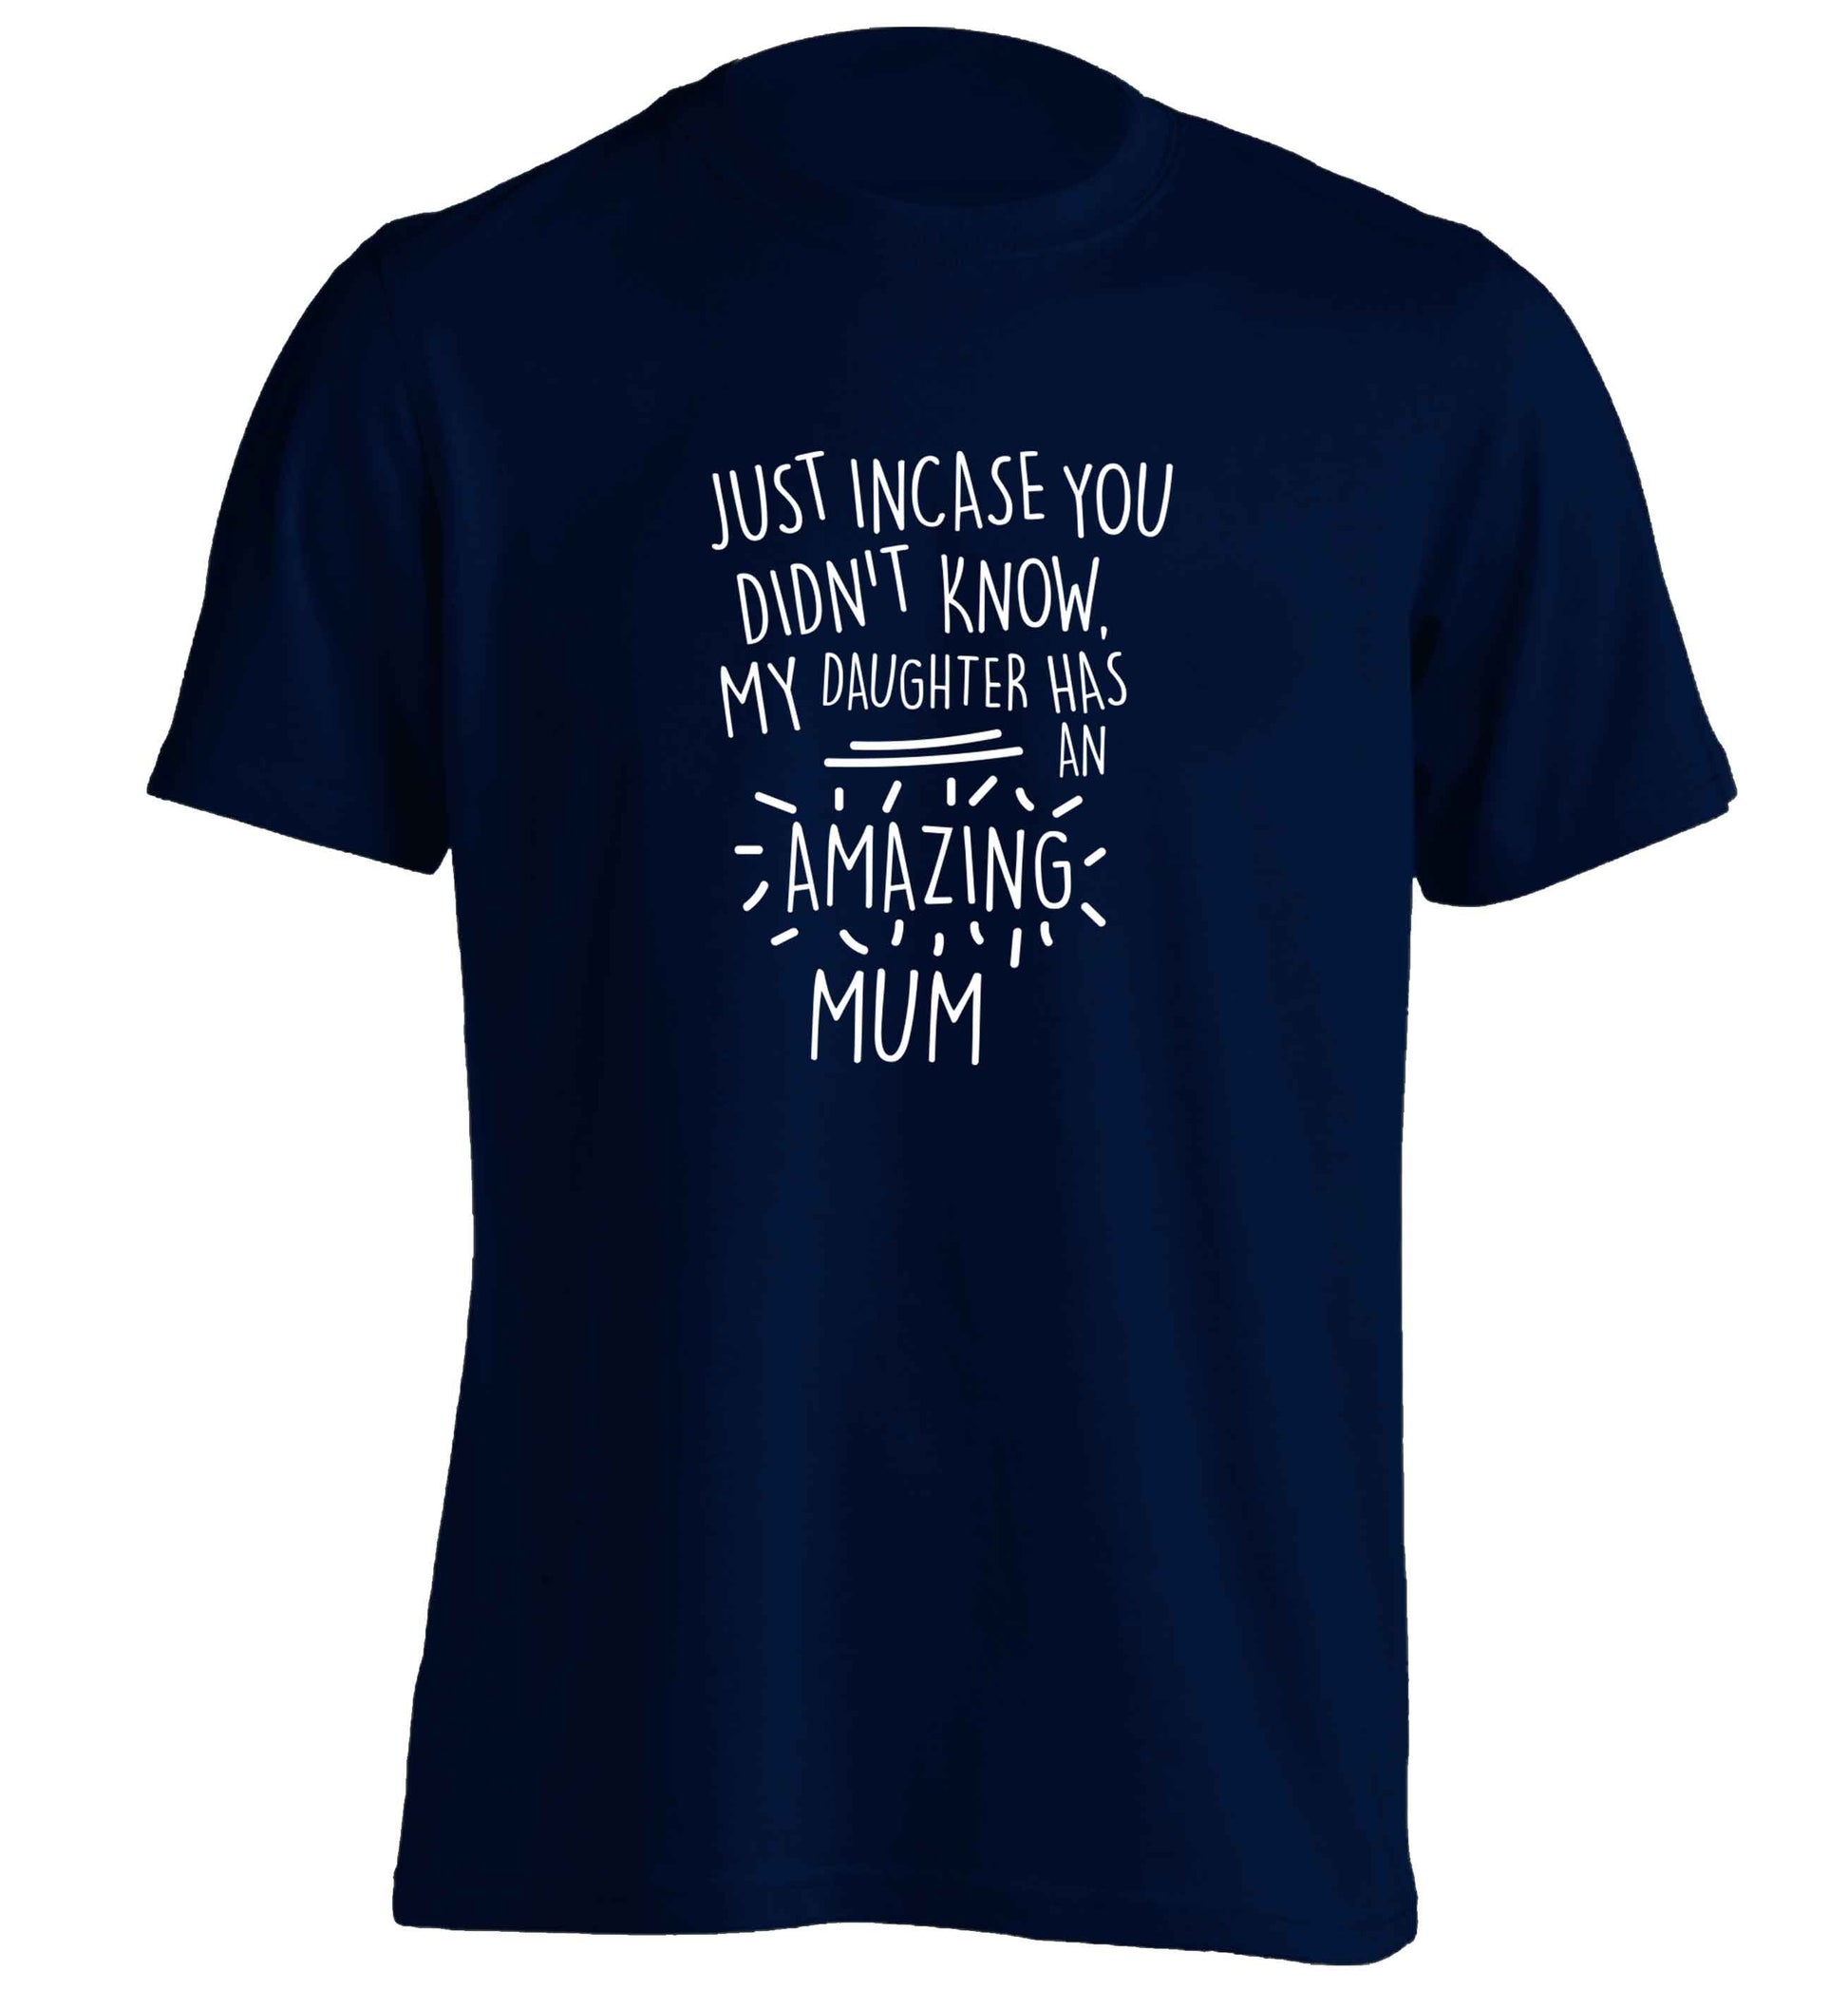 Just incase you didn't know my daughter has an amazing mum adults unisex navy Tshirt 2XL